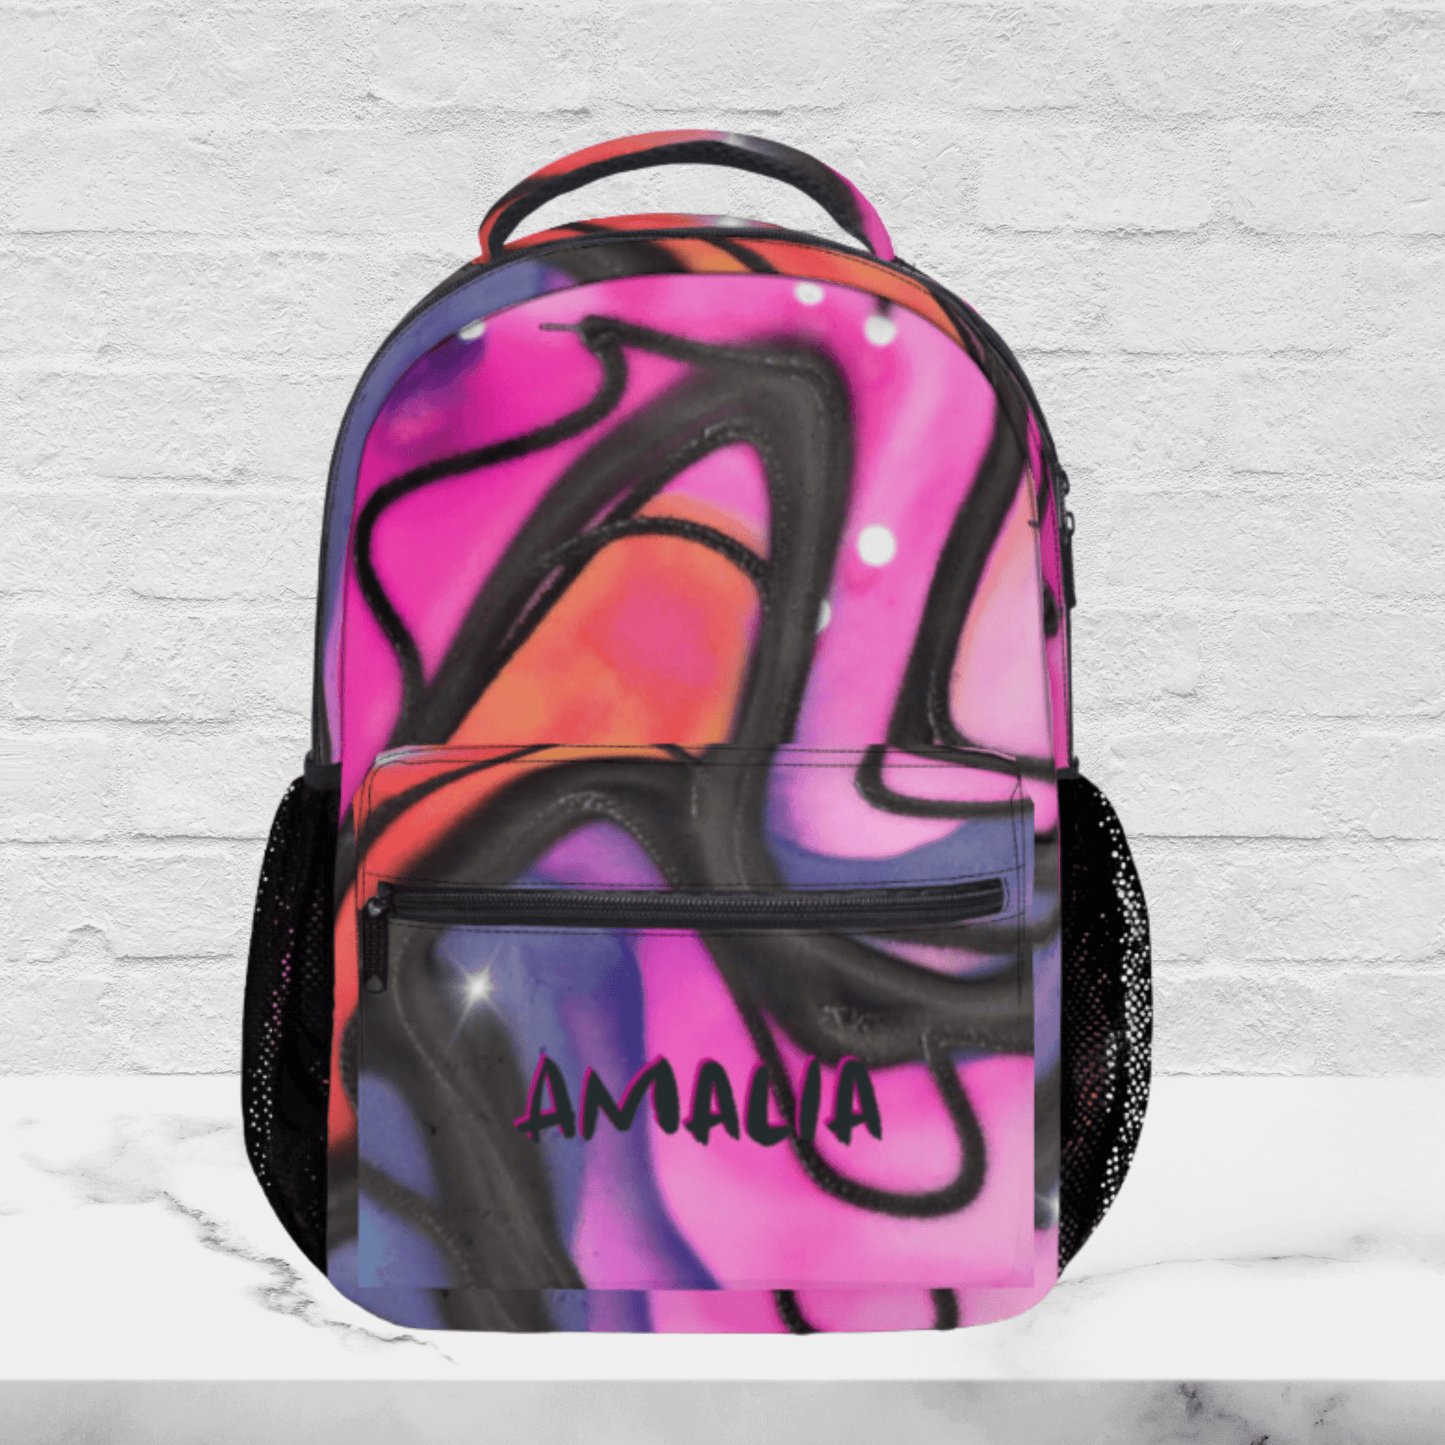 Our pink backpack for kids and teens shows the personalized name in black.